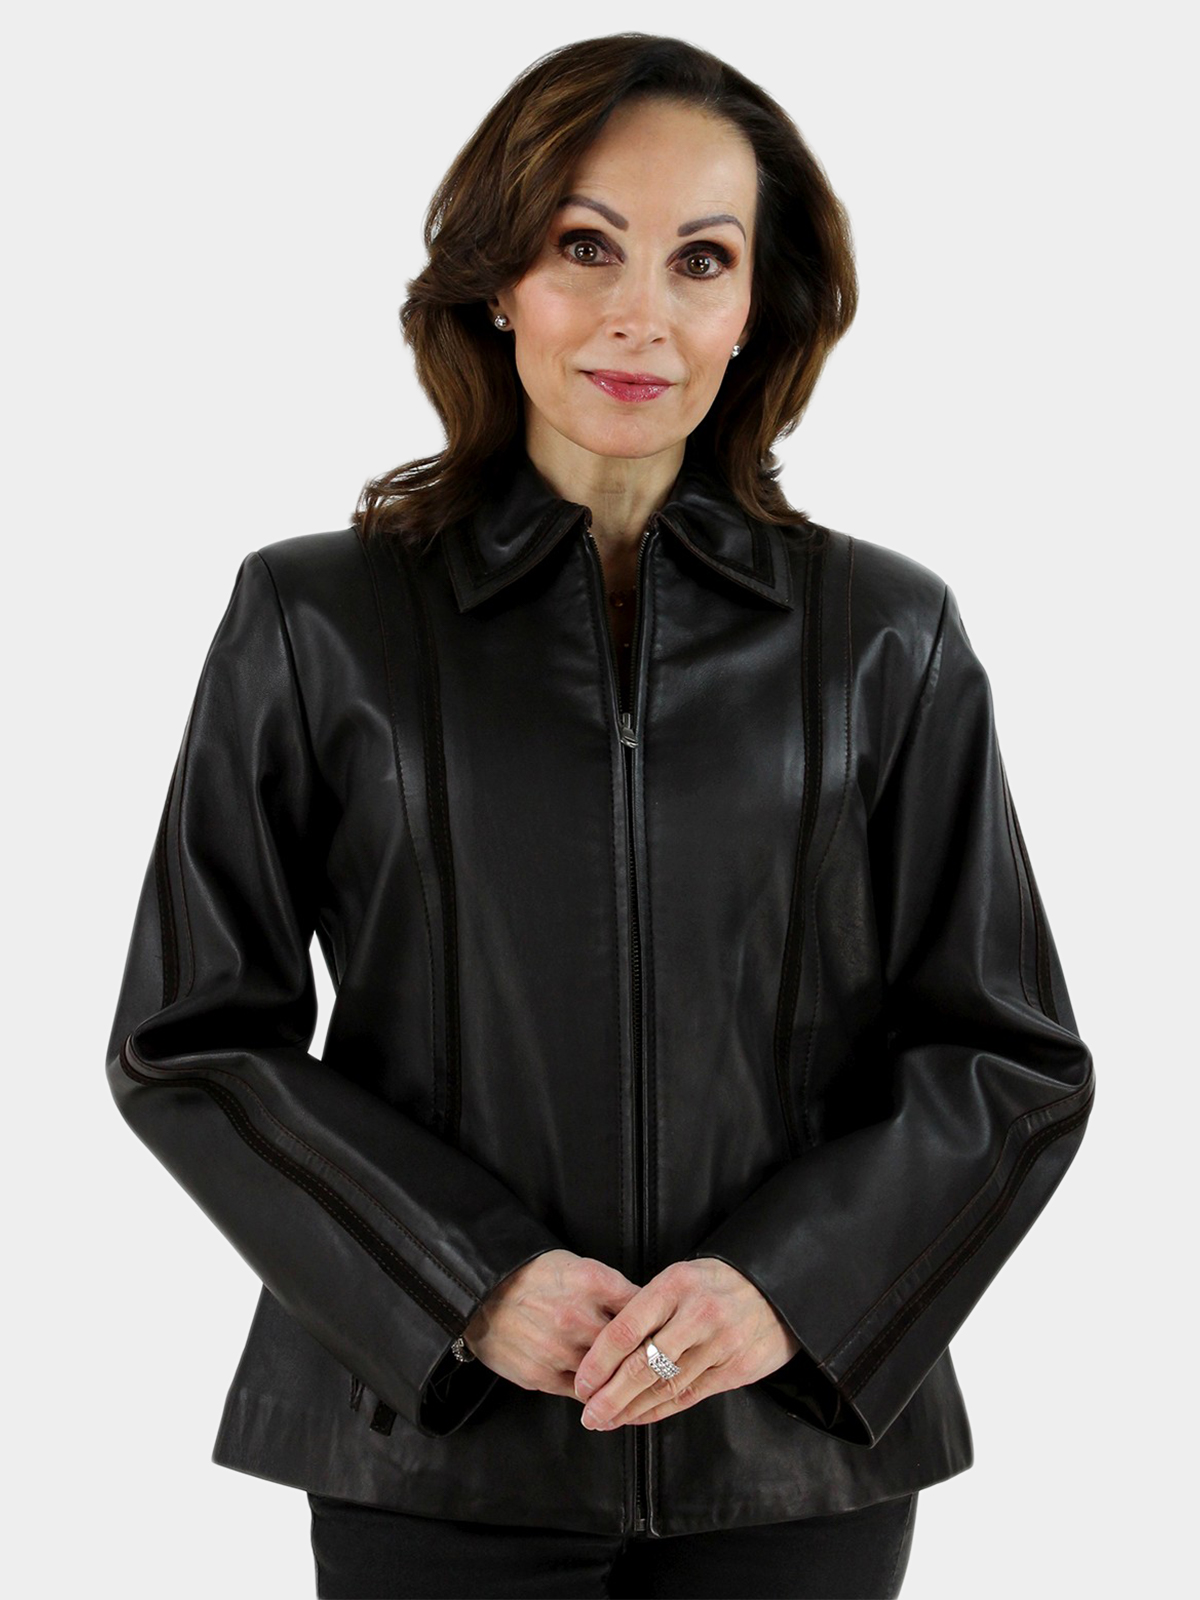 Woman's Brown Leather Jacket with Suede Trim